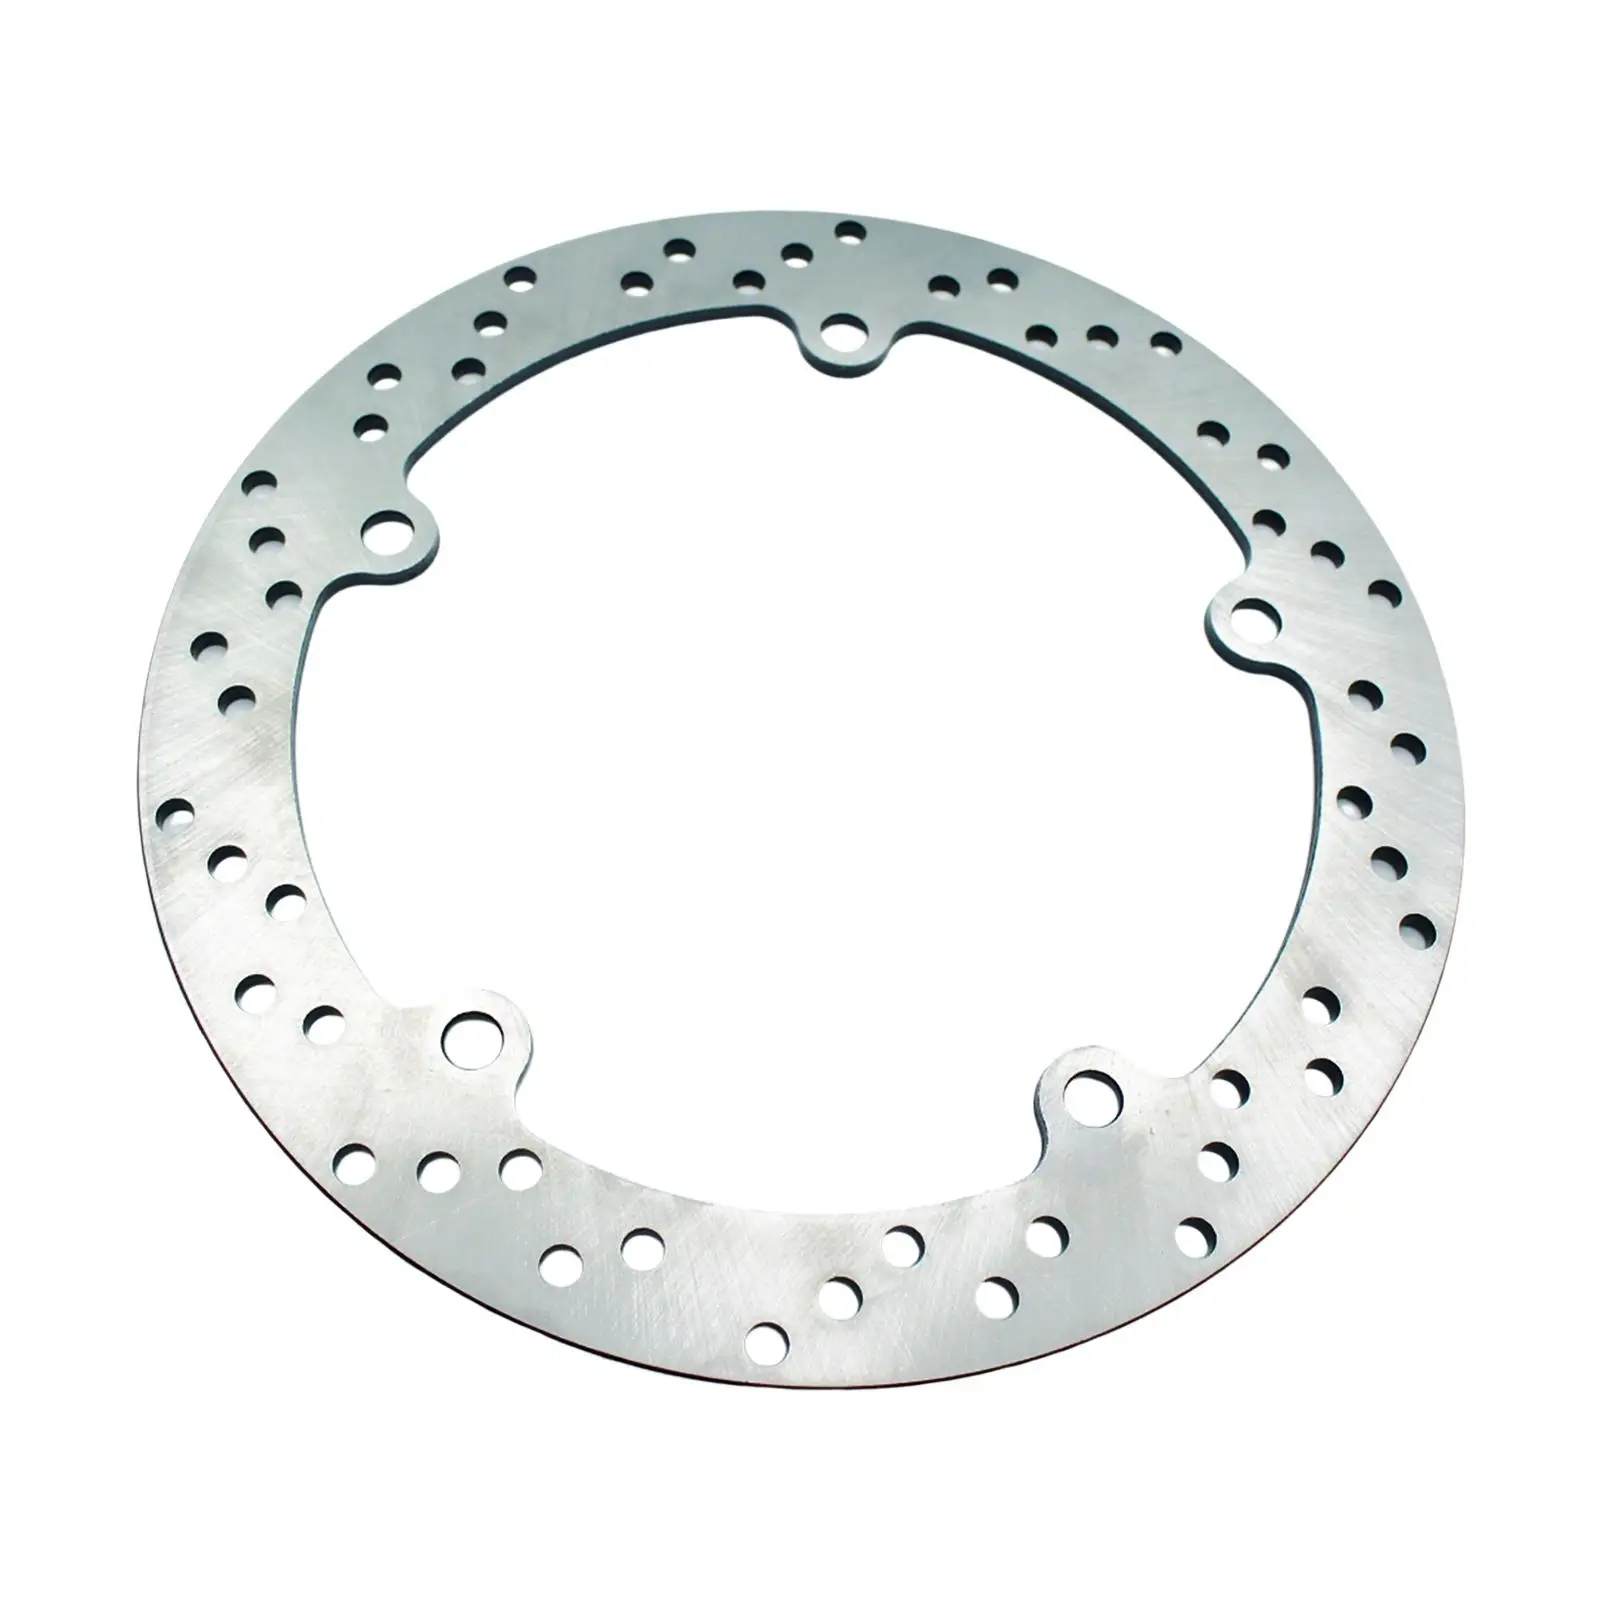 Motorcycle Rear Brake Disc Professional Spare Part Accessory for R1100RT R1100S